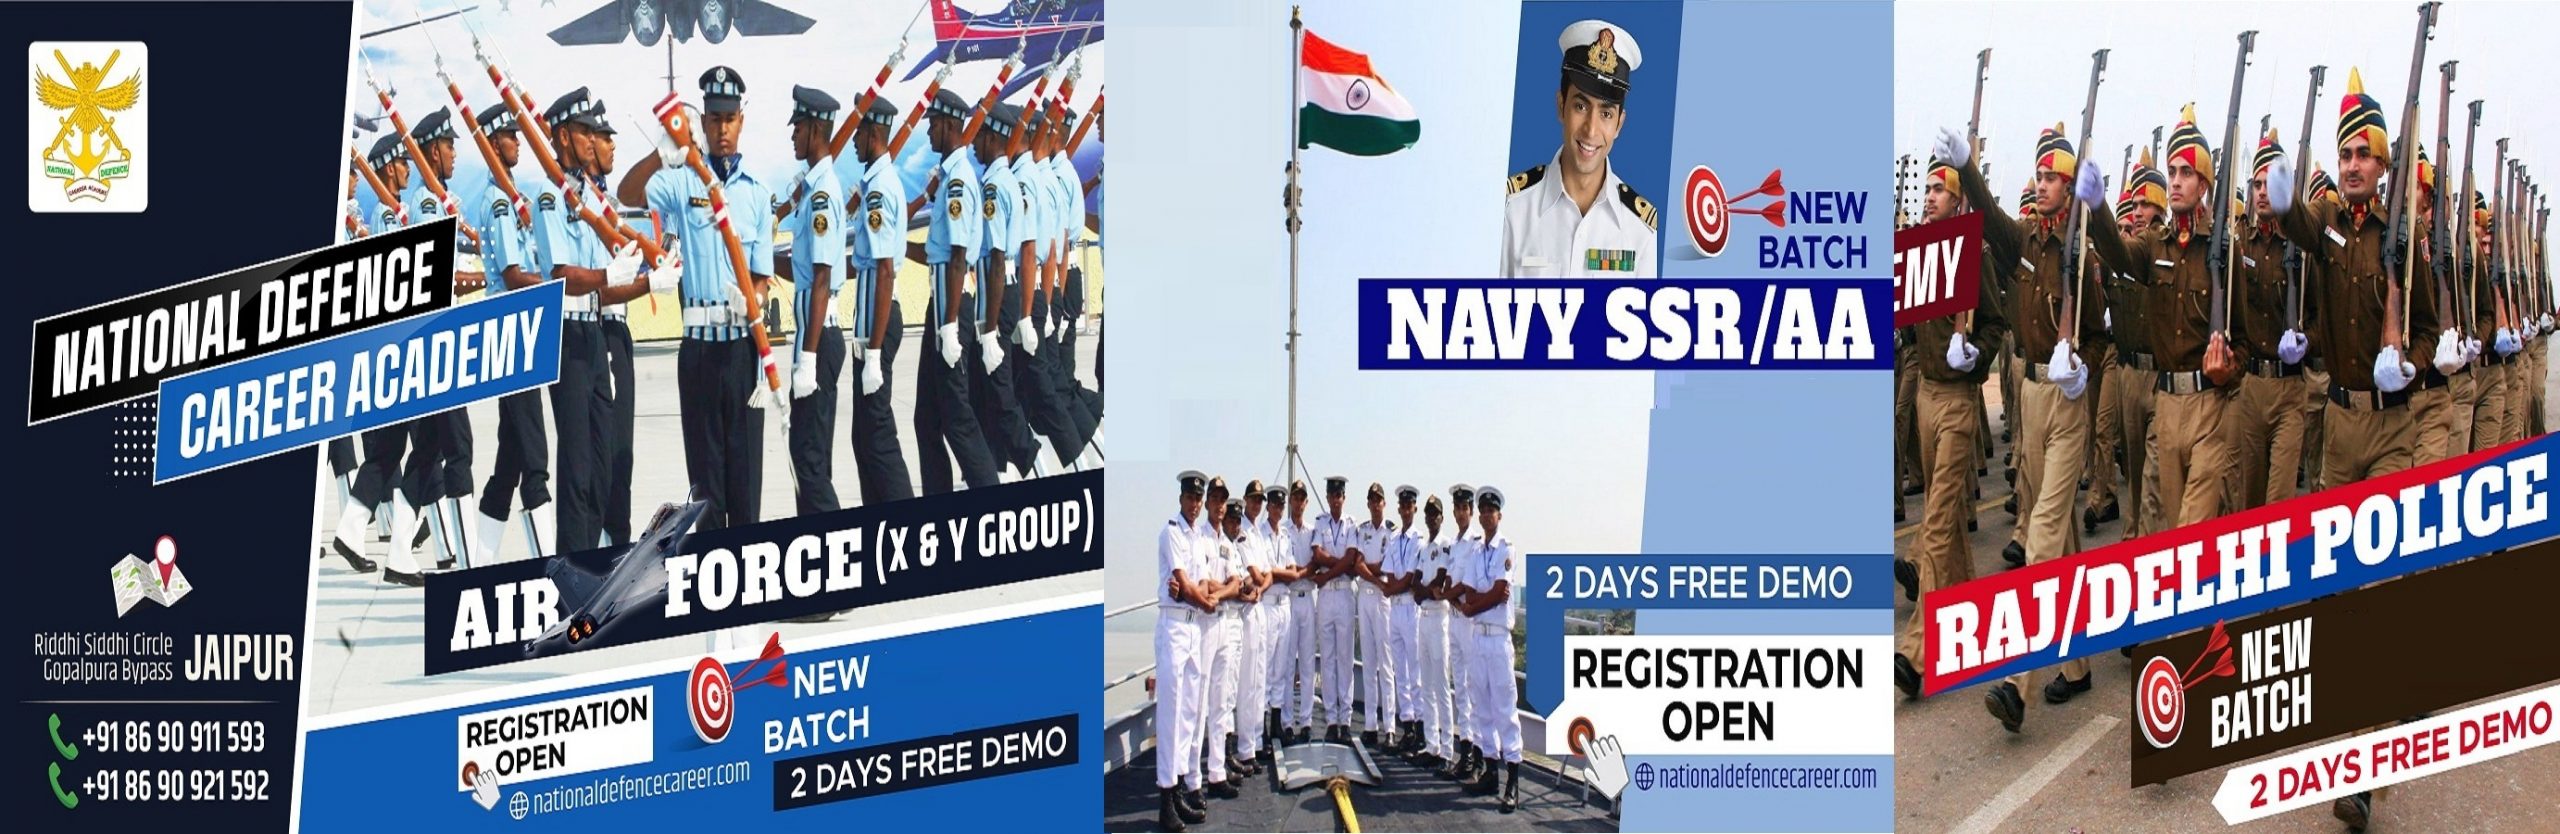 new batches info at National Defence Career Academy Jaipur Rajasthan